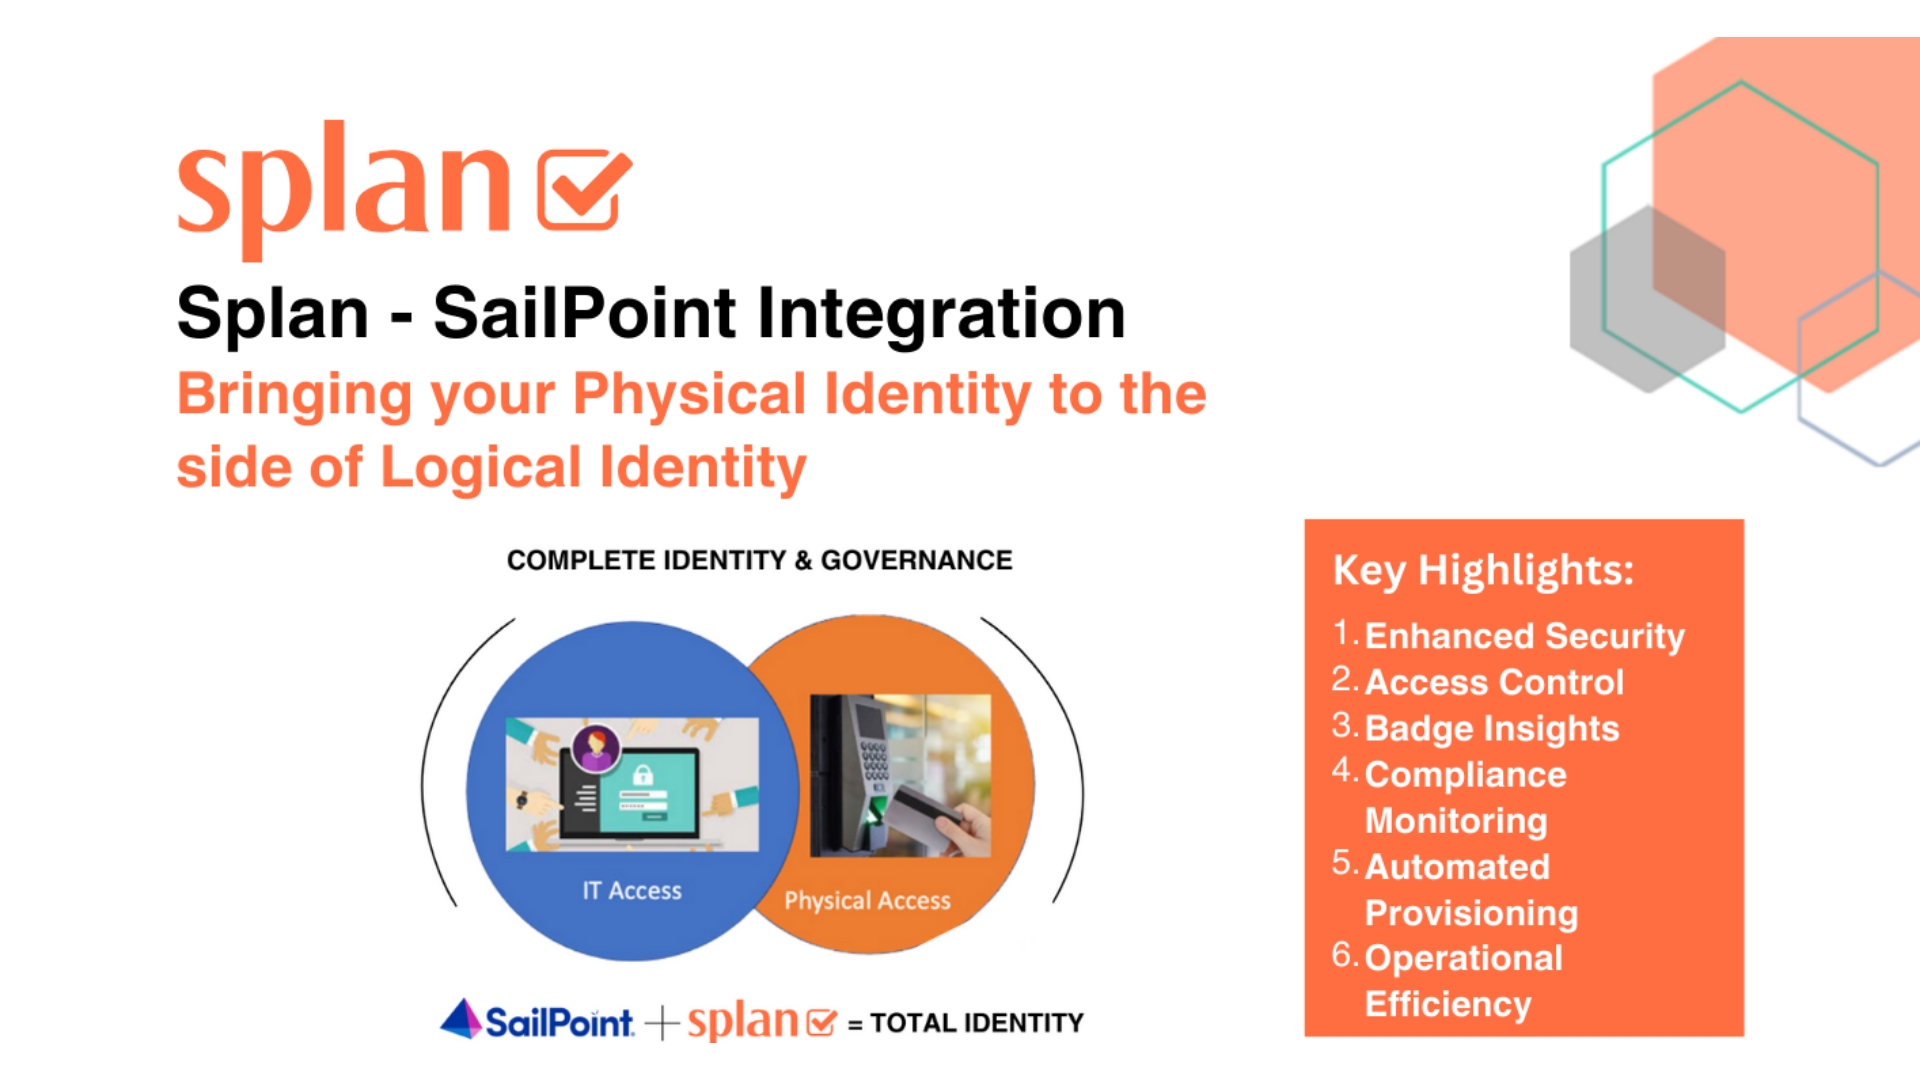 Bridging the Physical Identity with Logical Identity for a Total Identity Solution